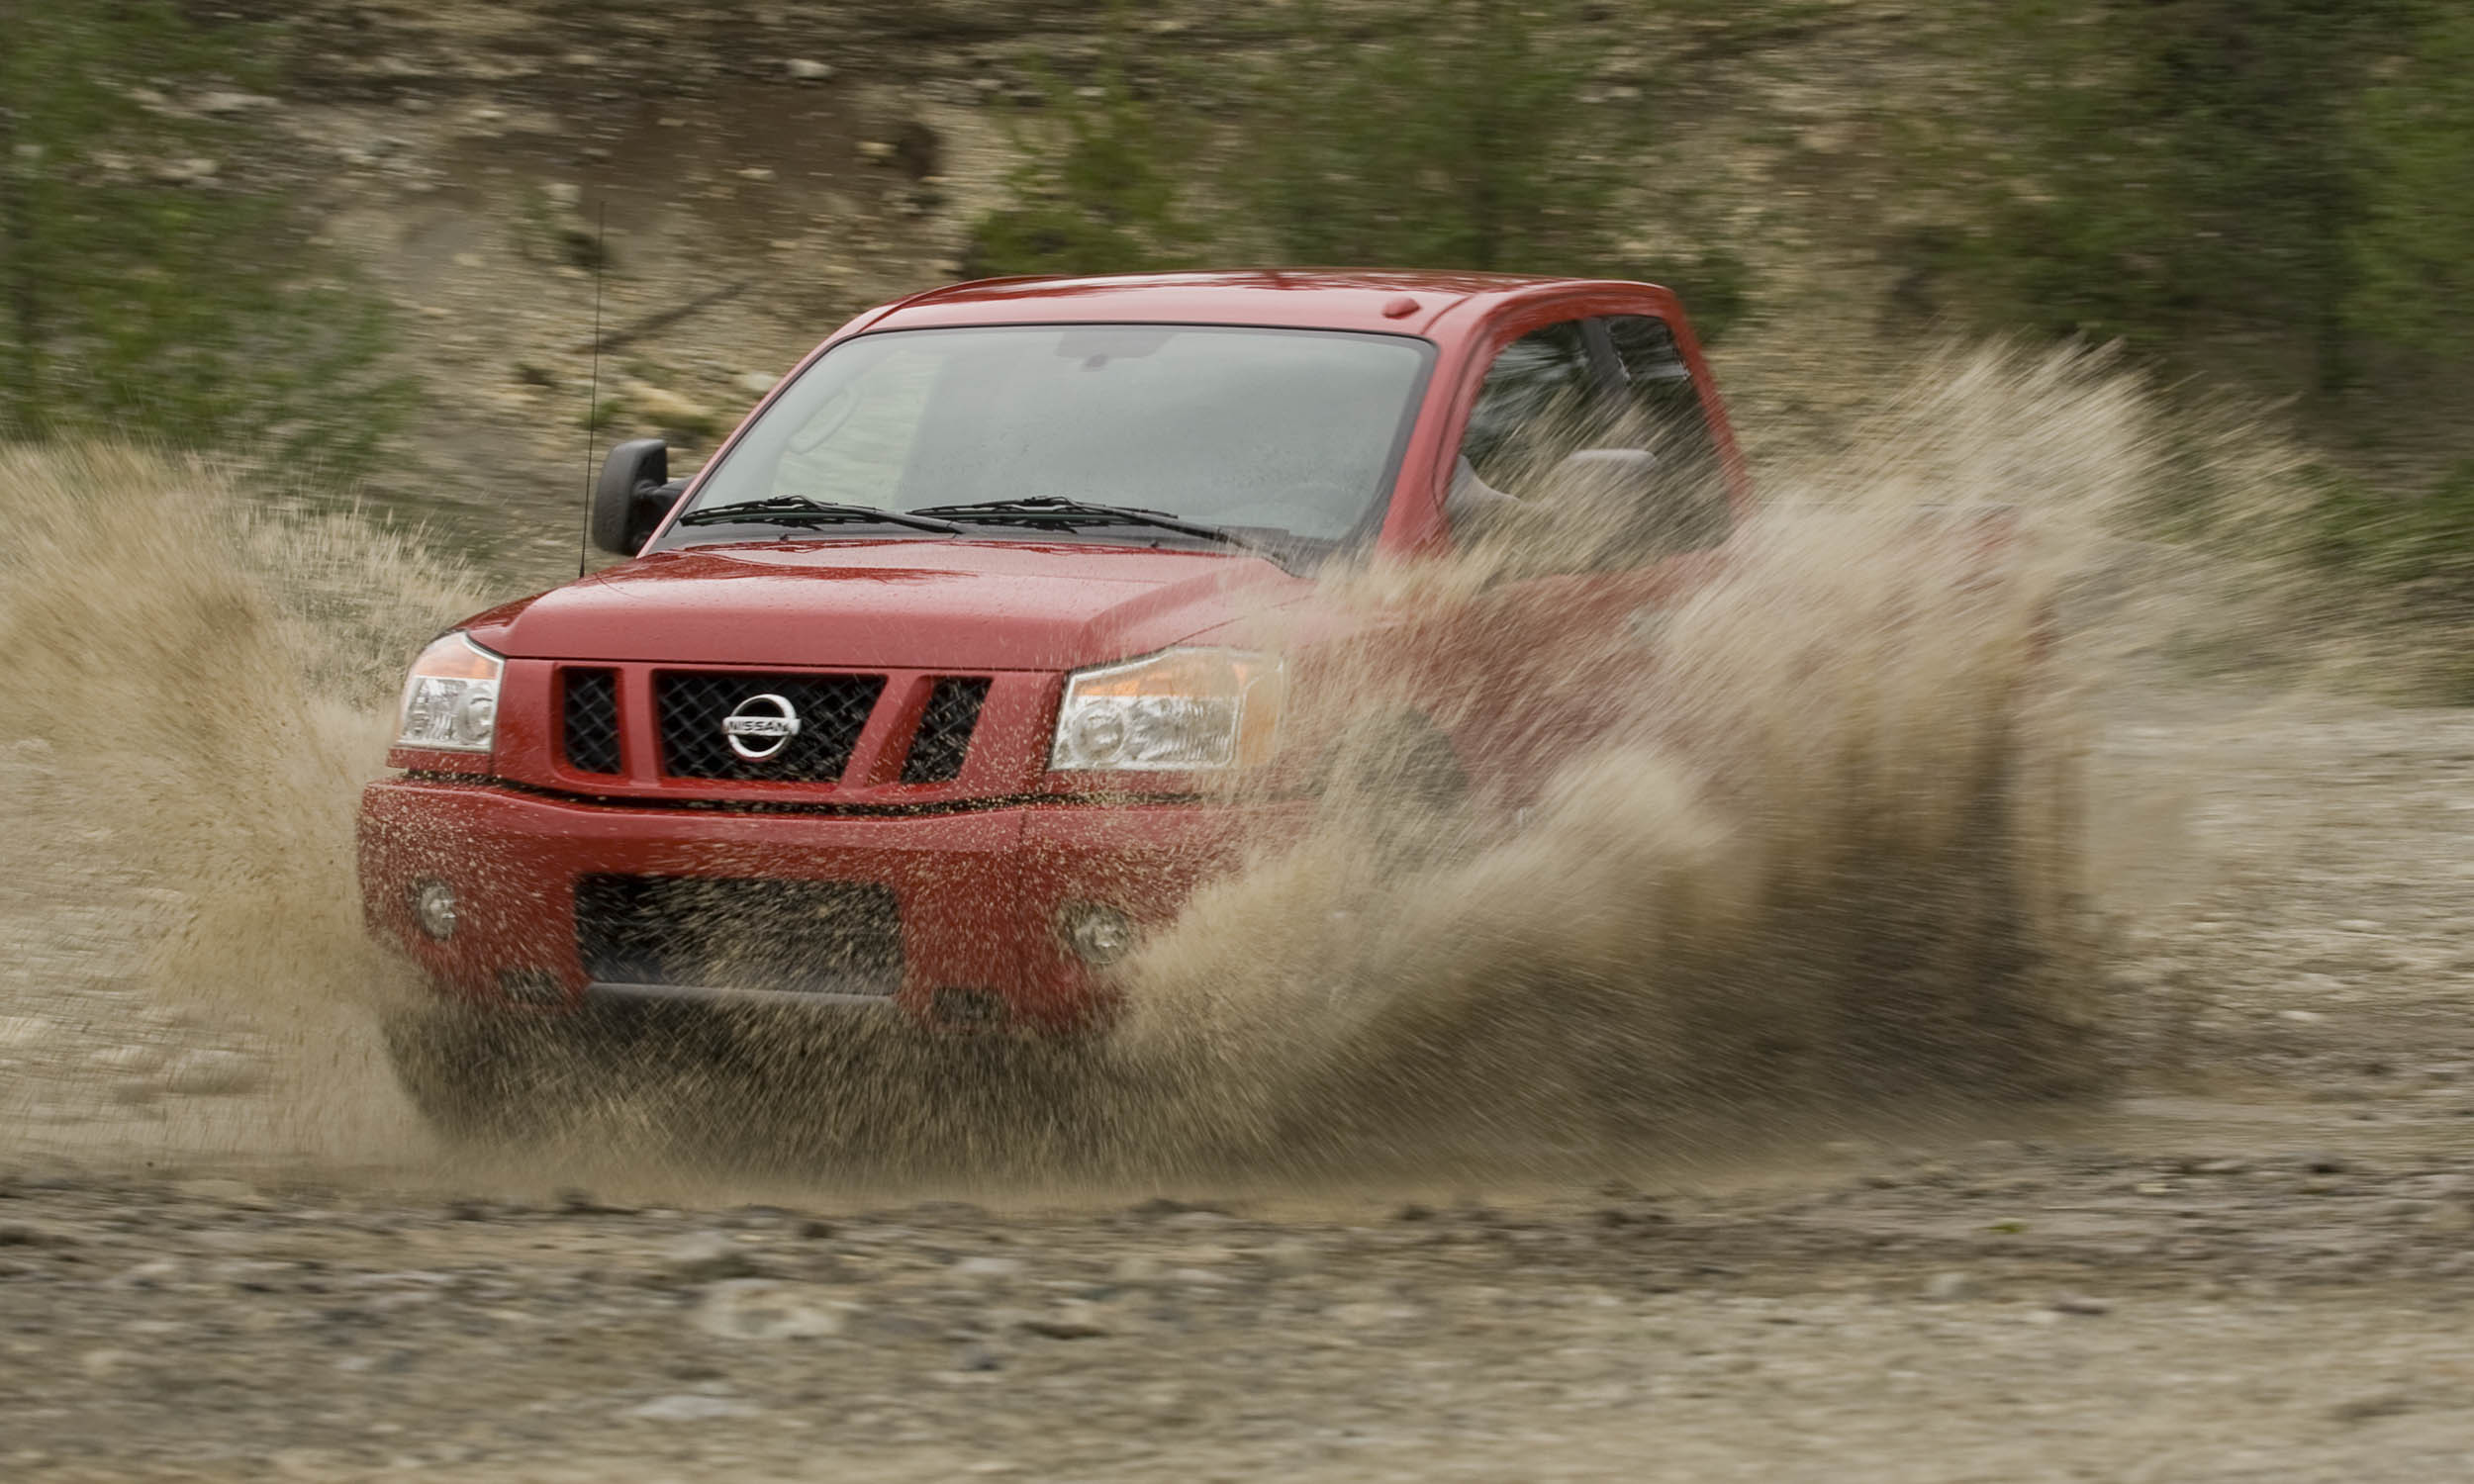 Rugged on a Budget: 4x4s Under $20,000